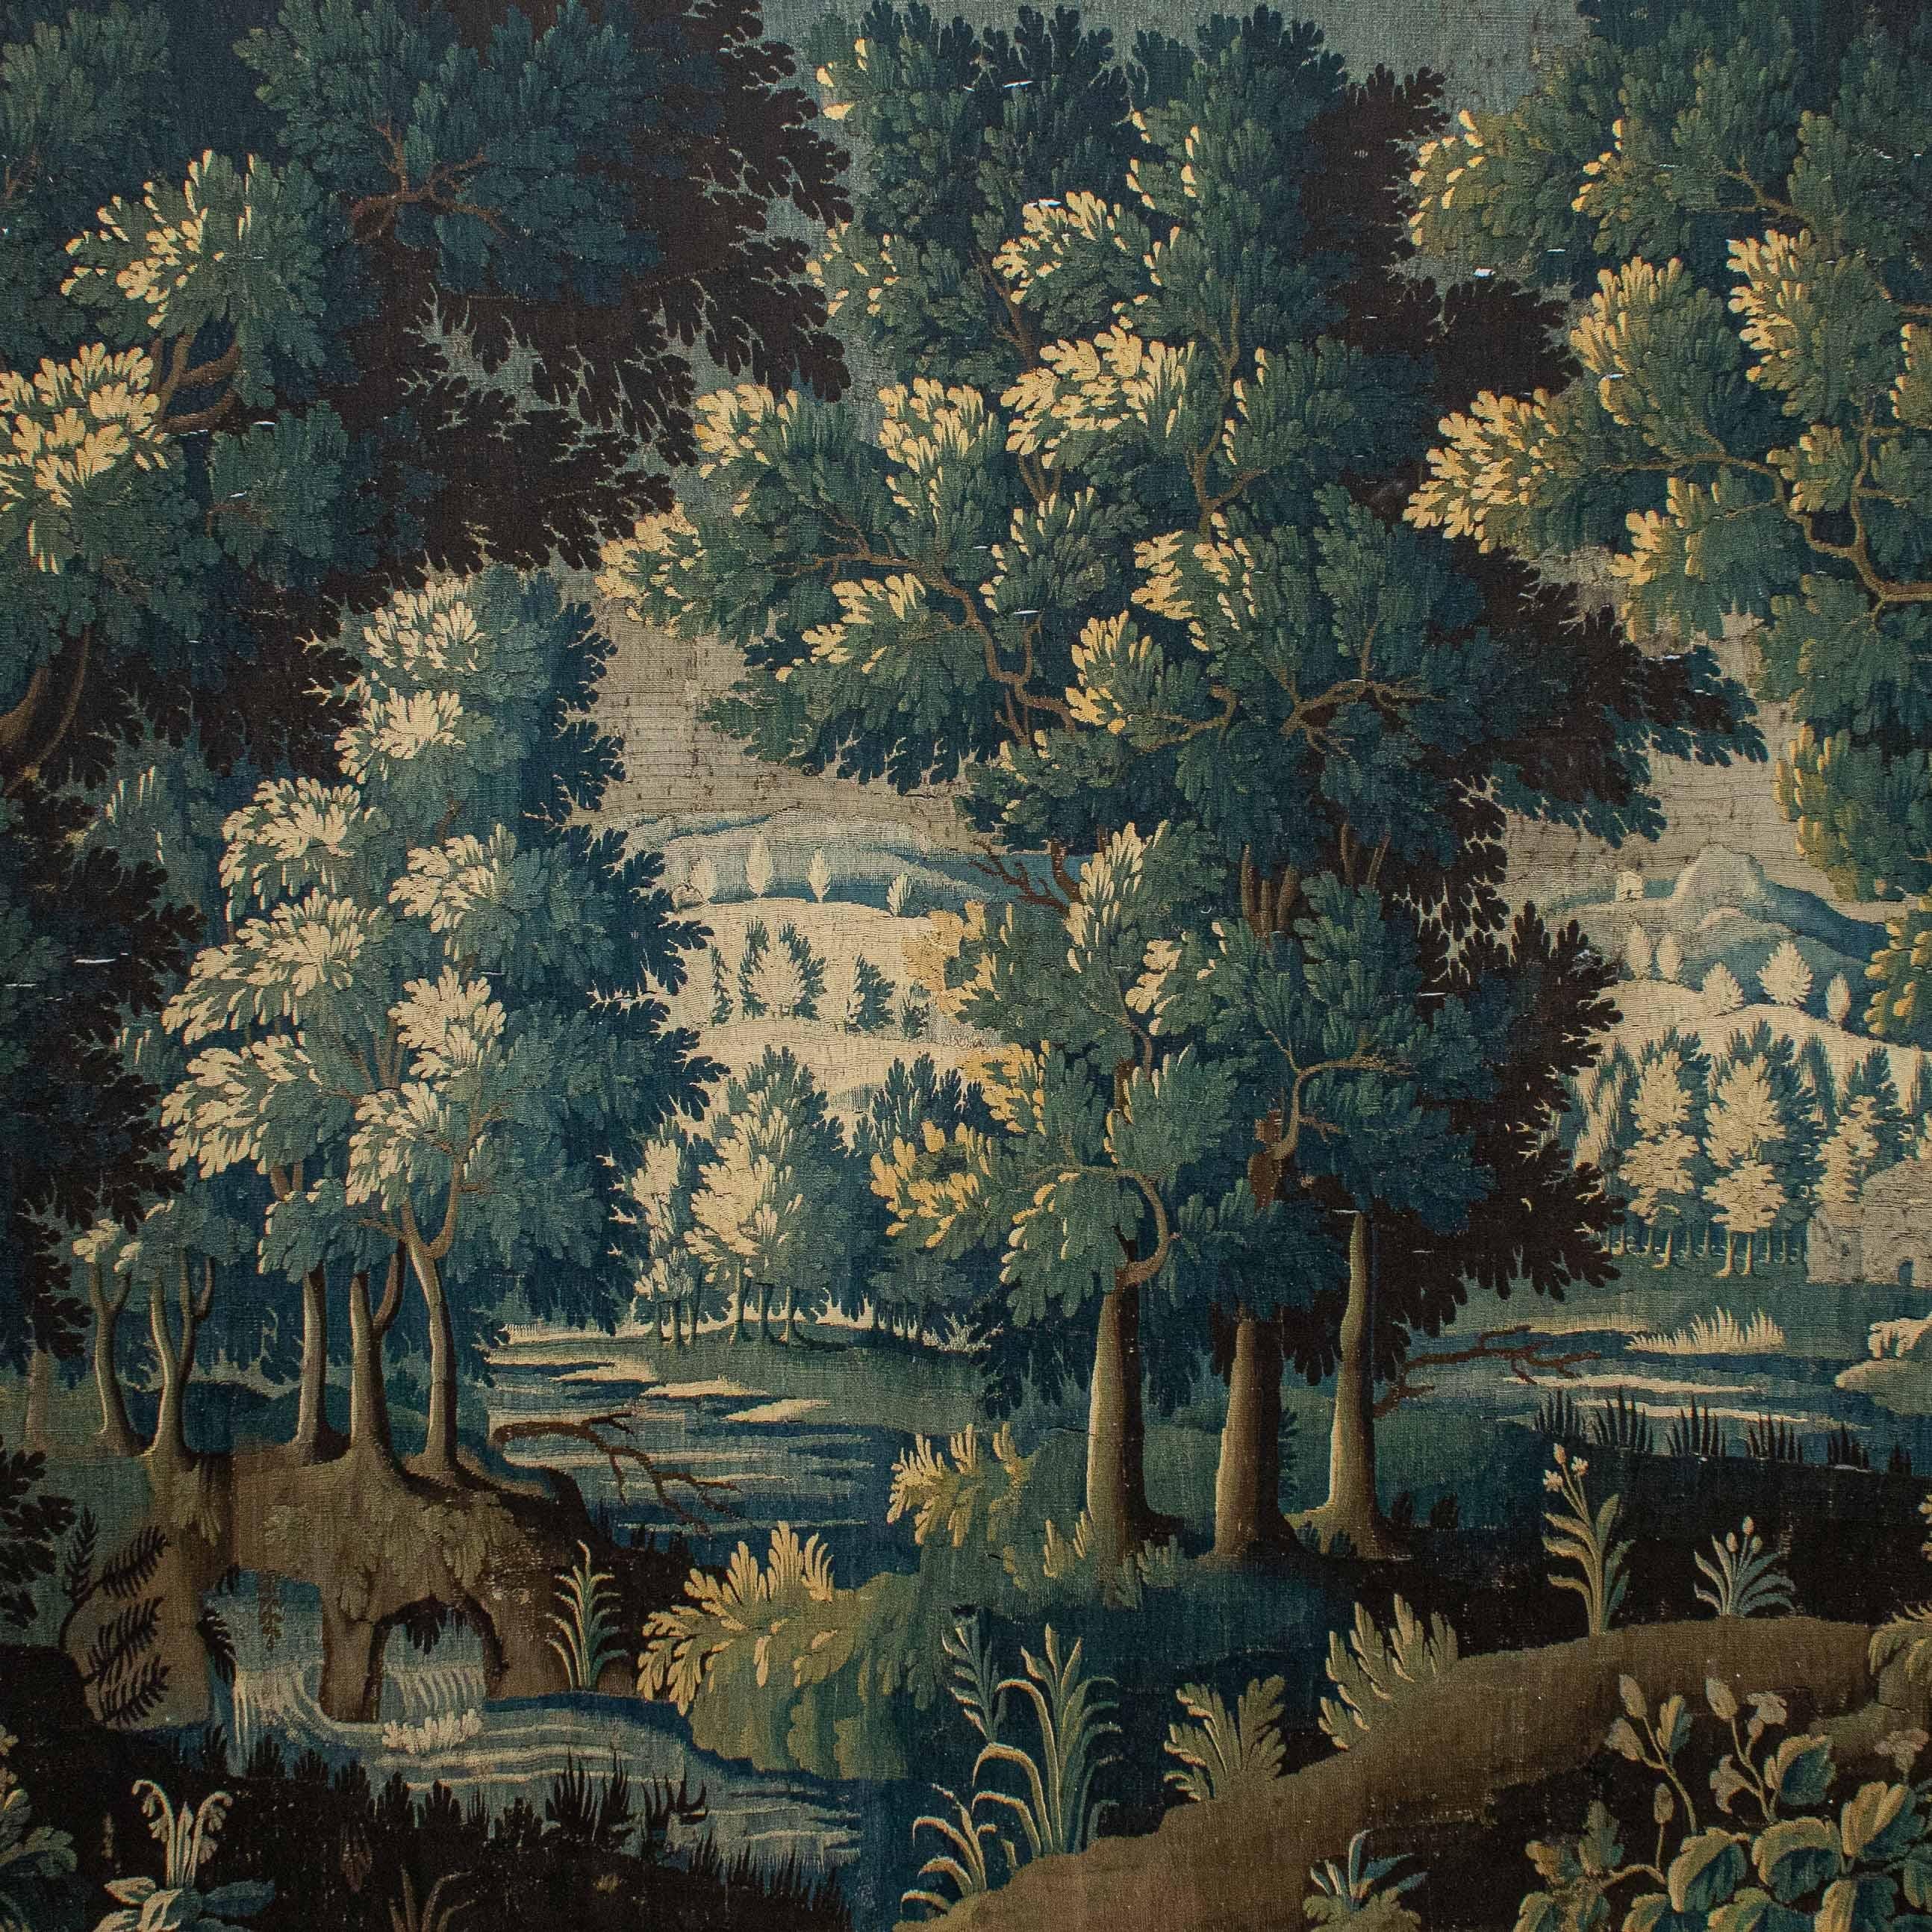 Aubusson, 17th century

Tapestry with landscape

Silk, 410 x 280 cm

The first documents relating to the origin of weaving date back to the year 2000 BC. approximately and are represented by wall paintings of Egyptian tombs depicting the